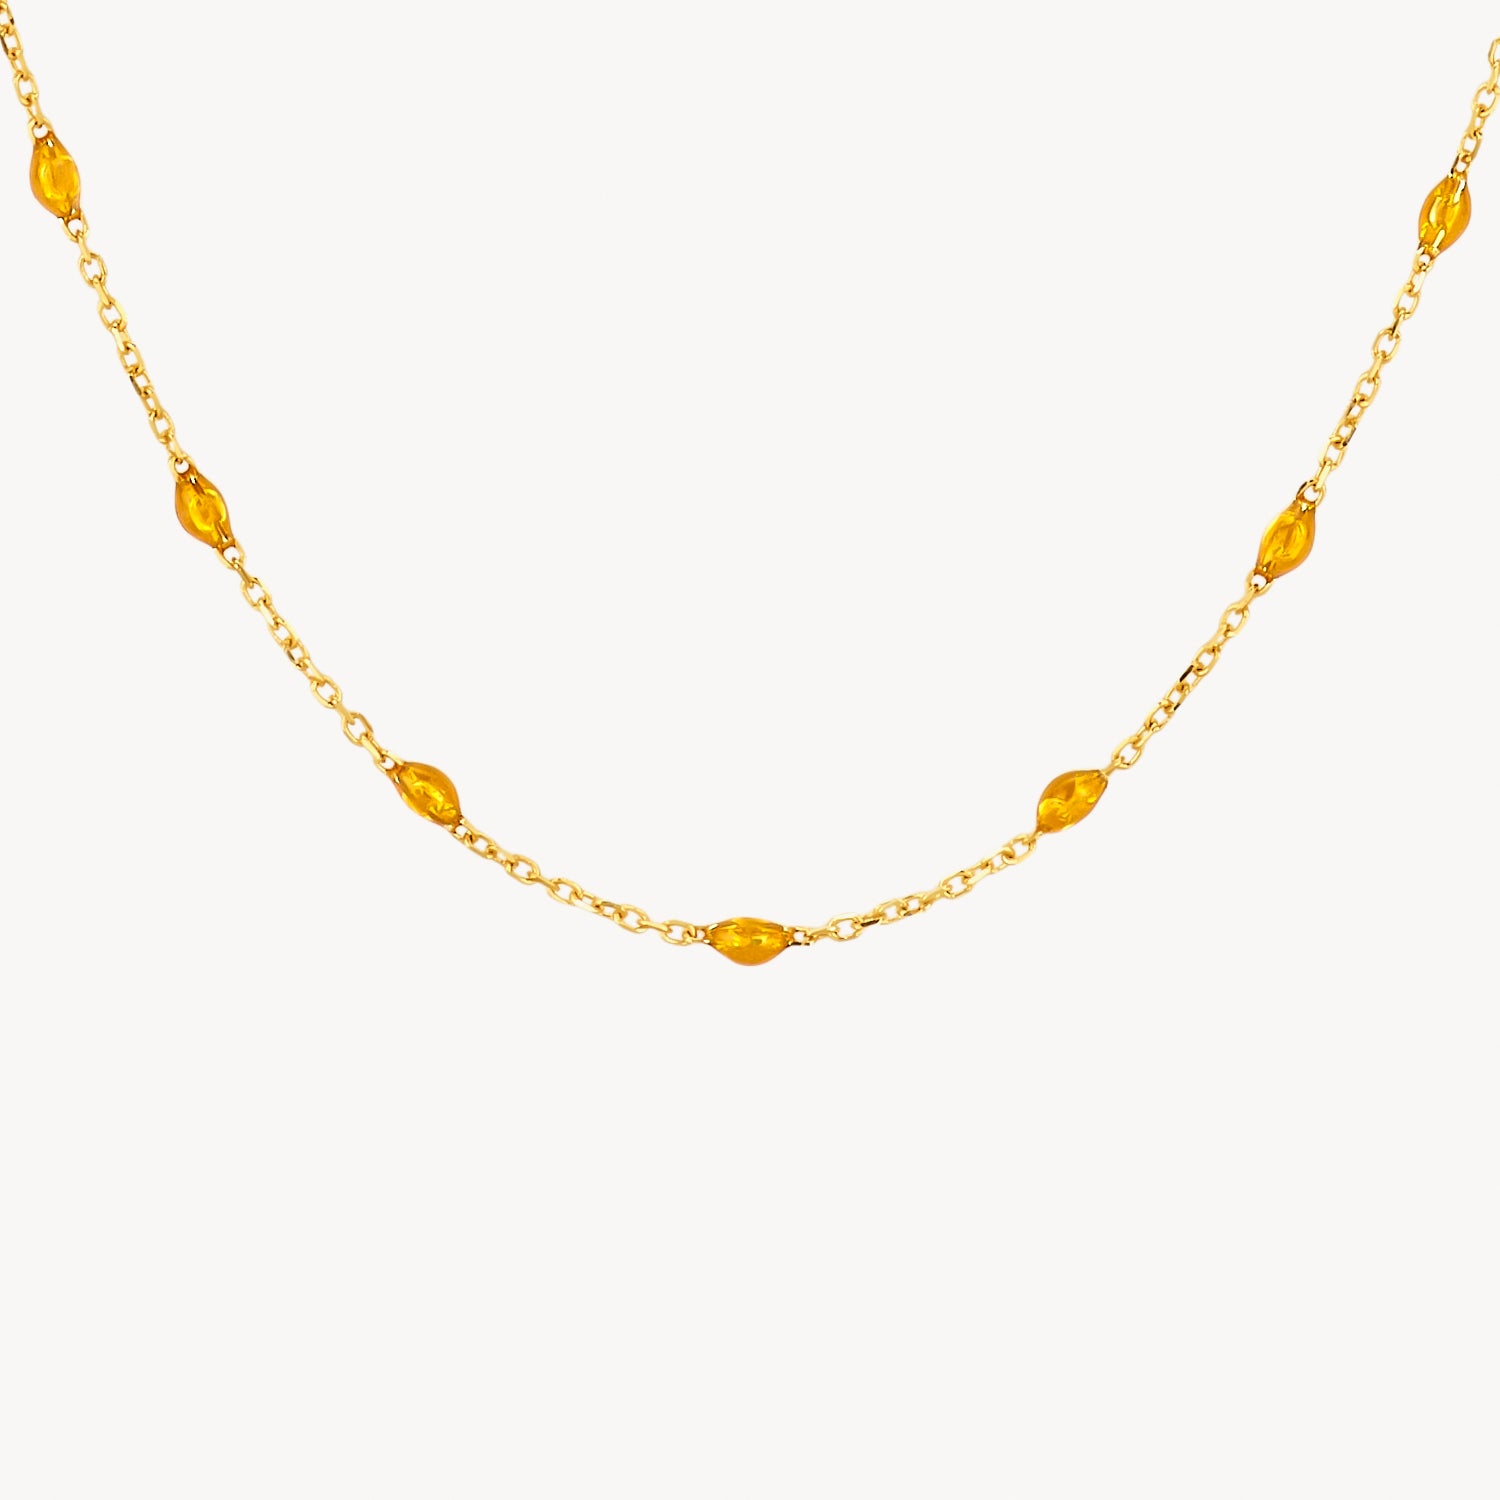 Necklace 3162YRC - 14k Yellow gold with caramel Resin